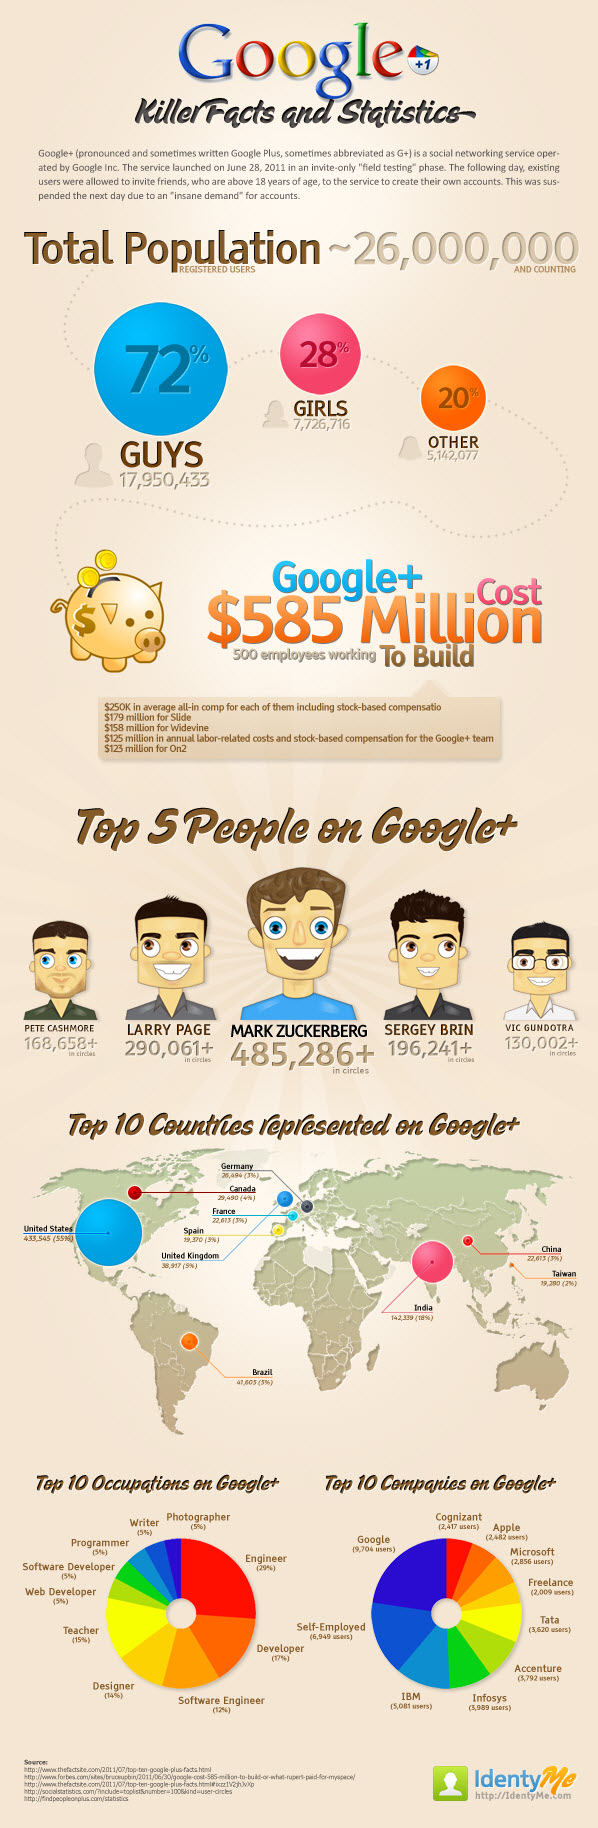 Google+-Facts-and-Figures